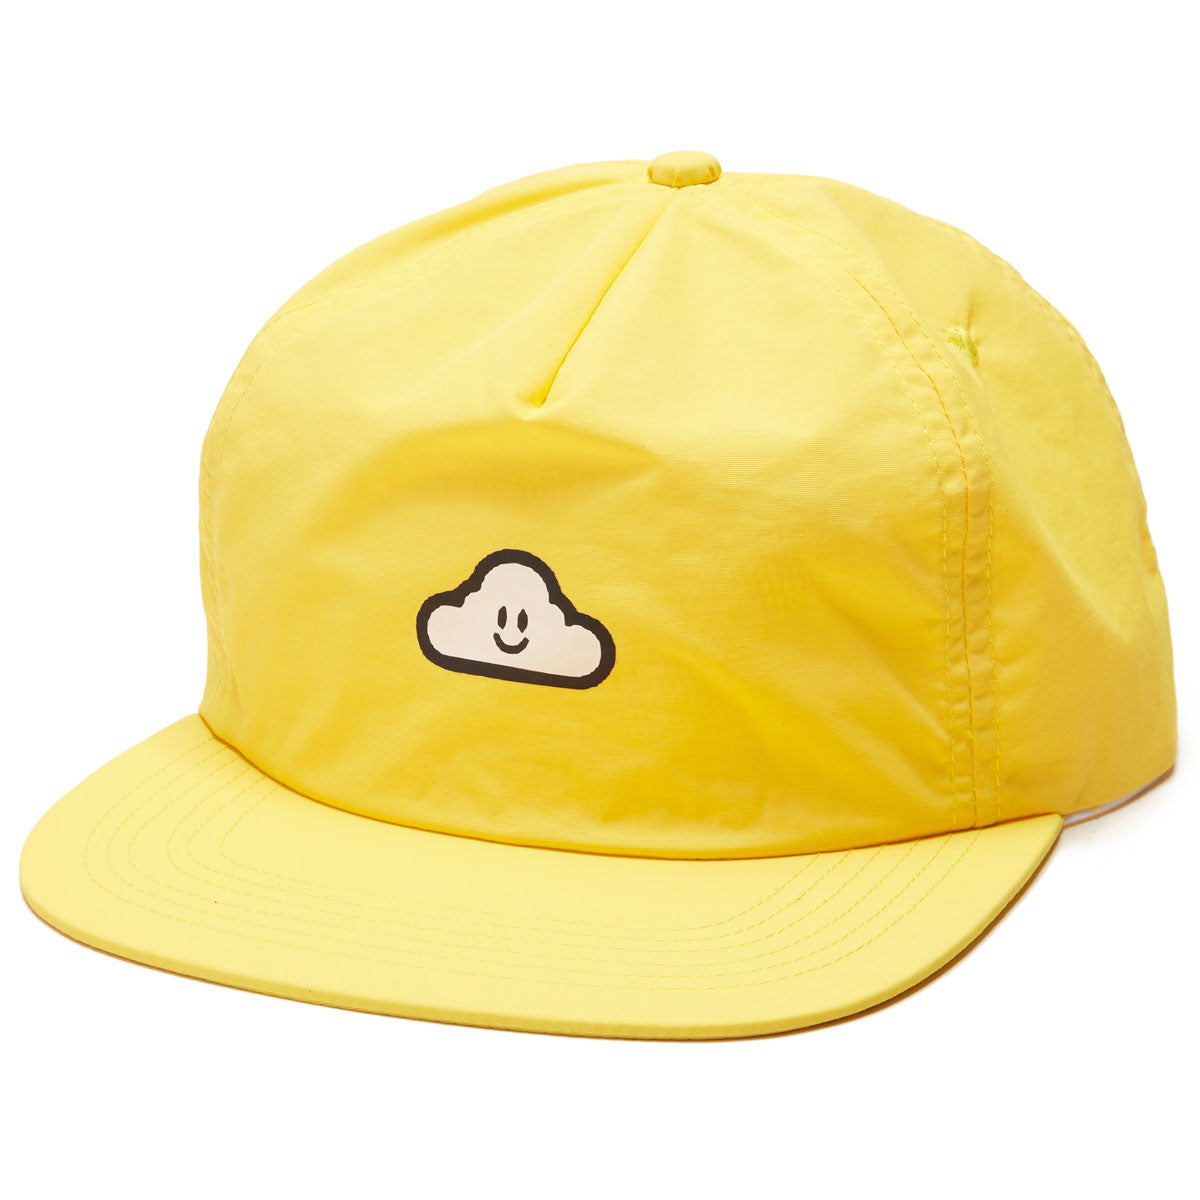 Thank You Wind Breaker Hat - Yellow image 1